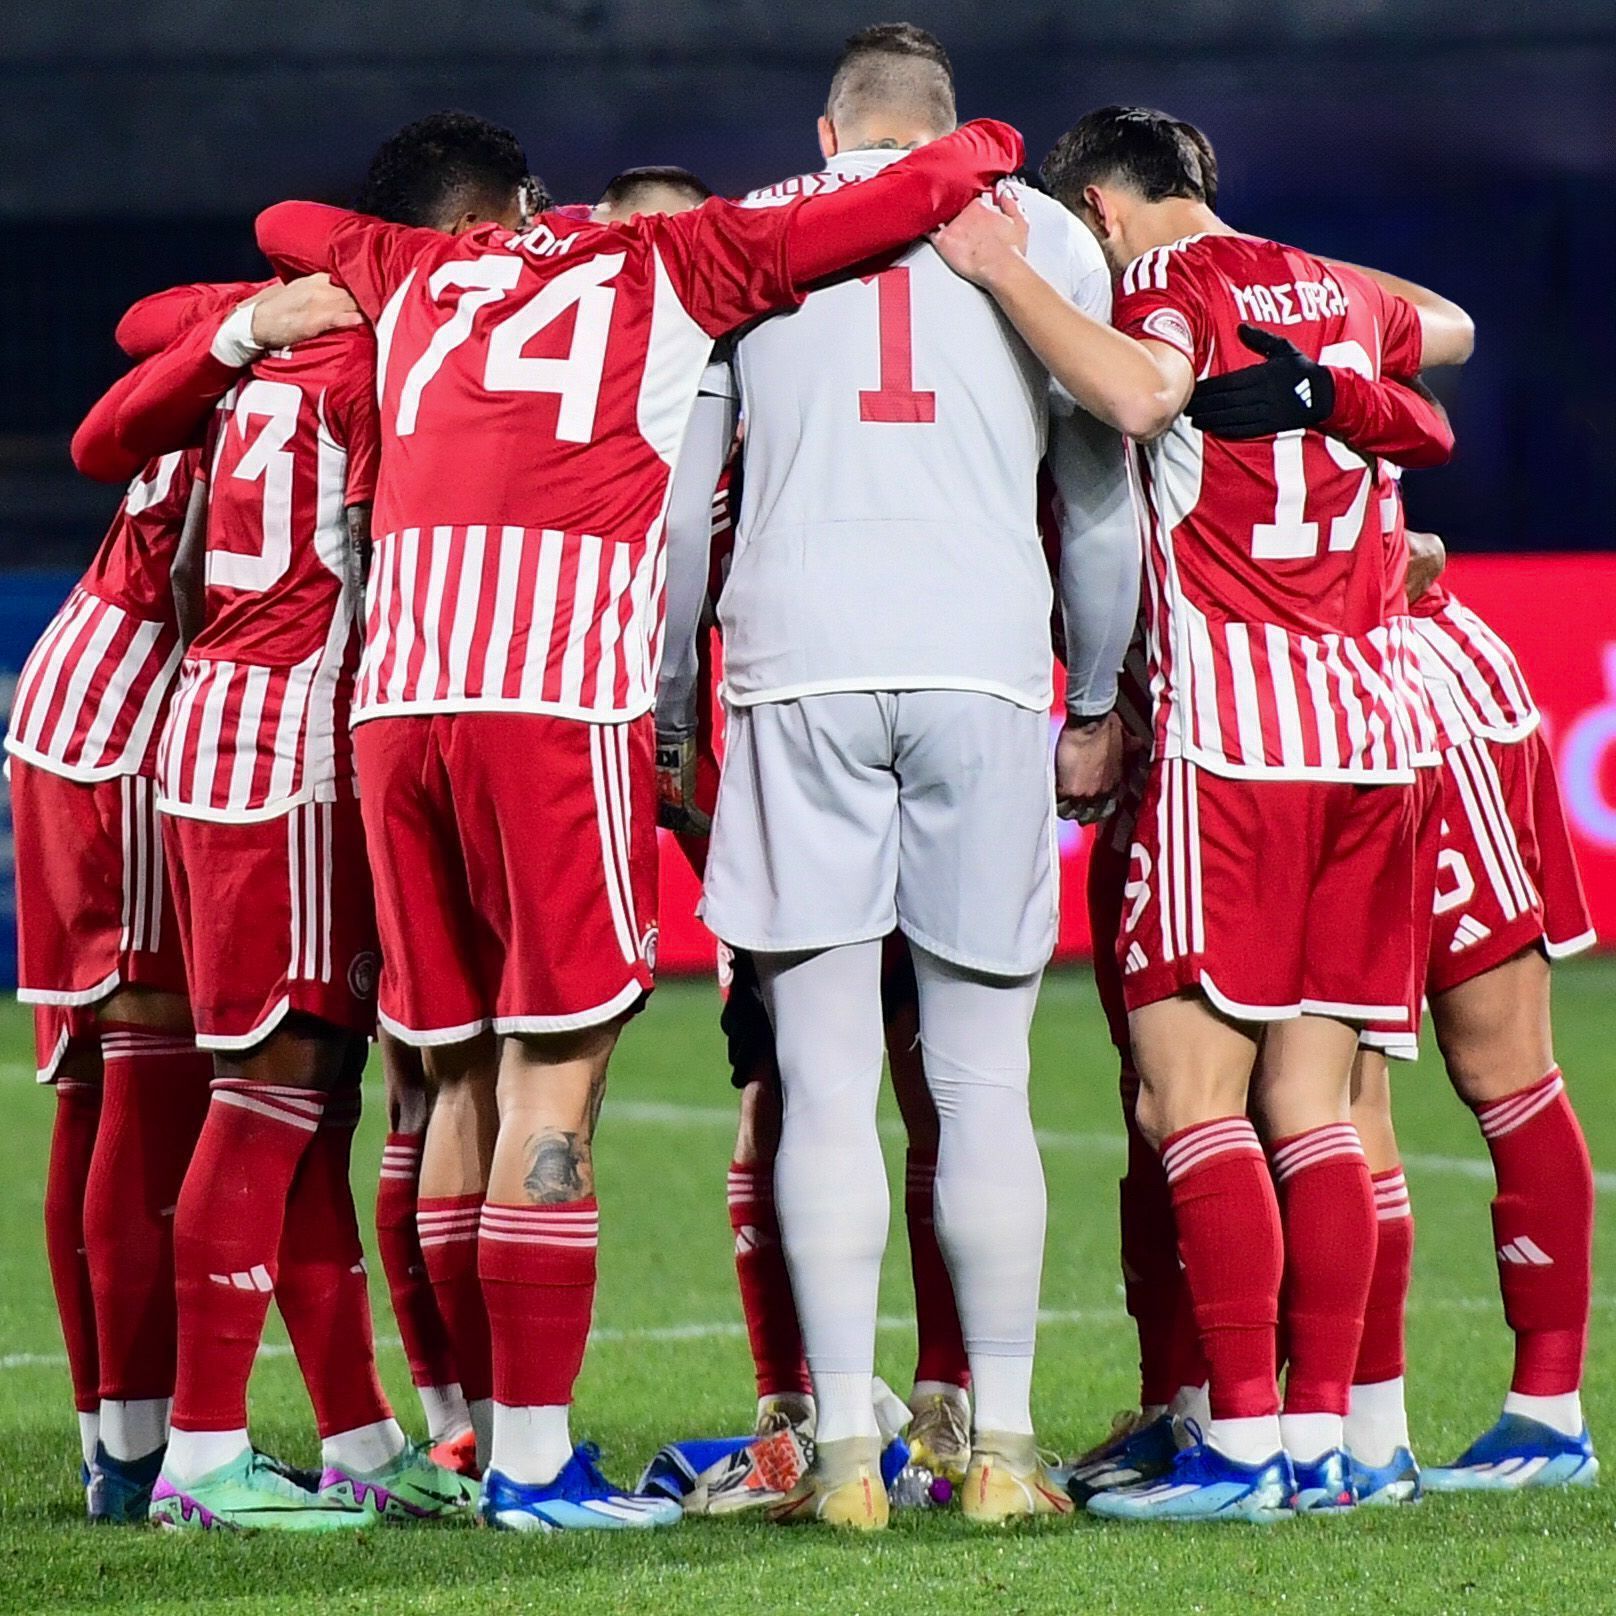 Olympiacos face Aris on Wednesday 